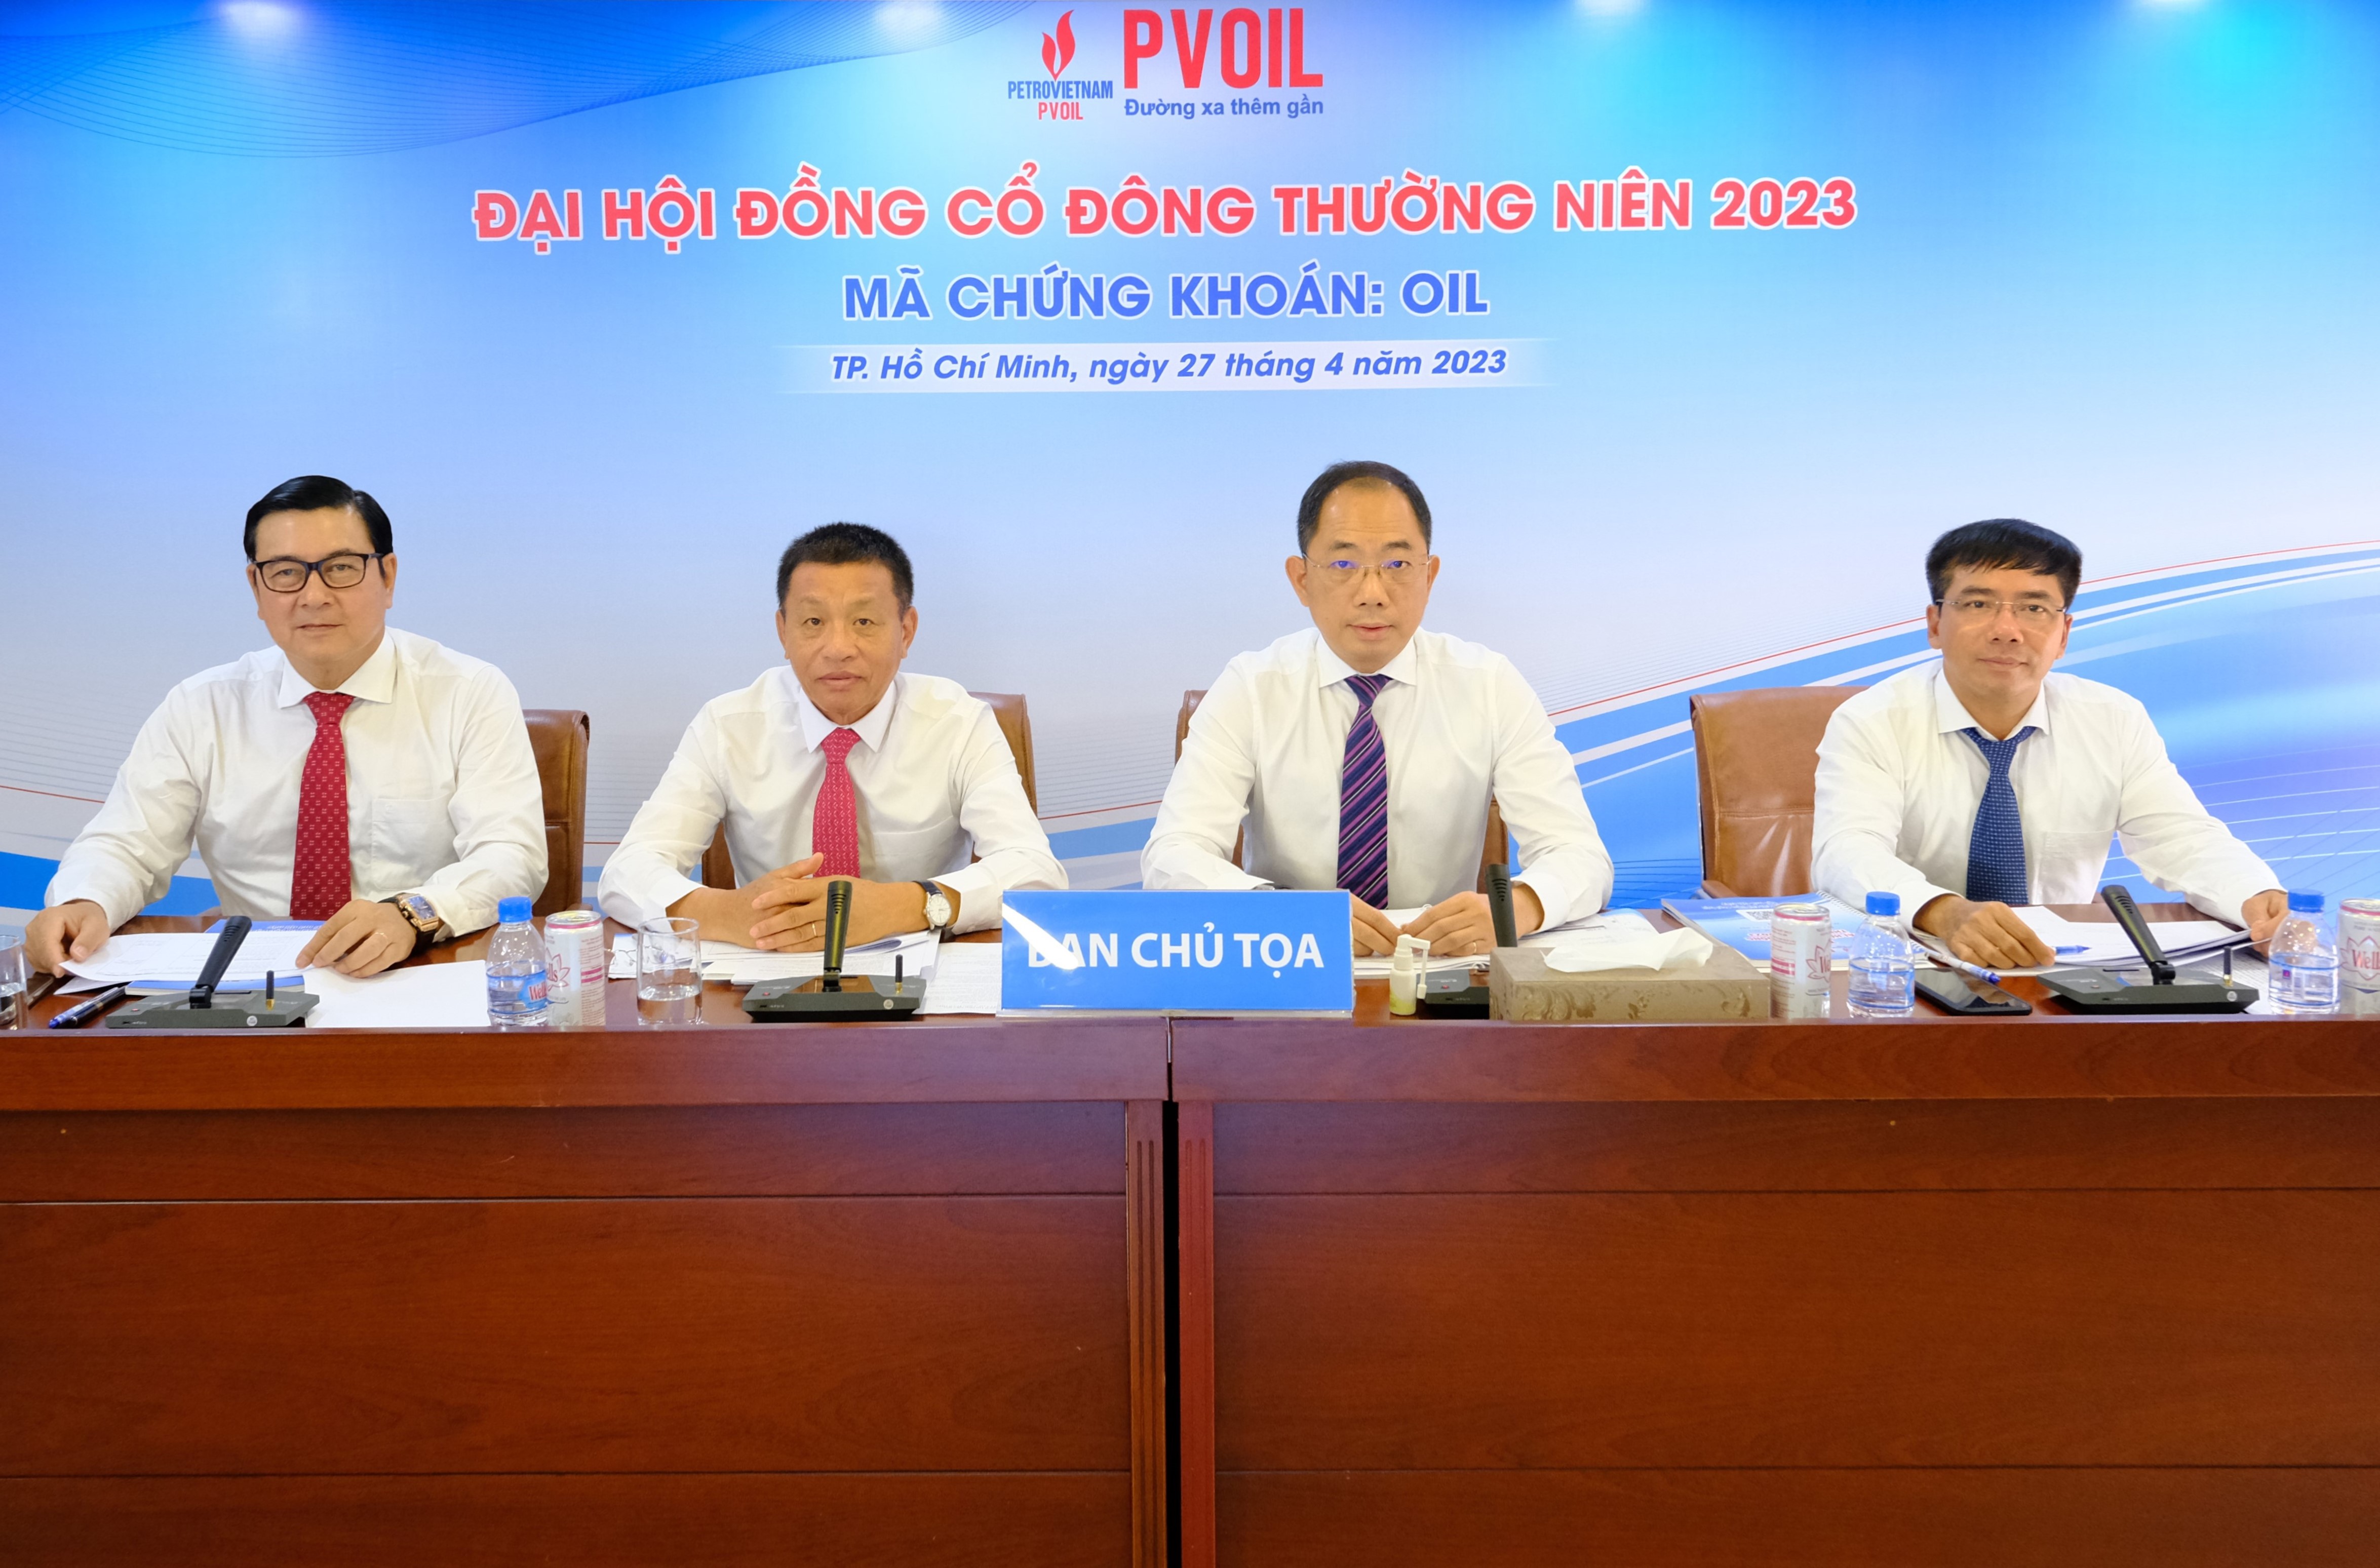 PVOIL Chairman calls for ensuring business efficiency during virtual AGM